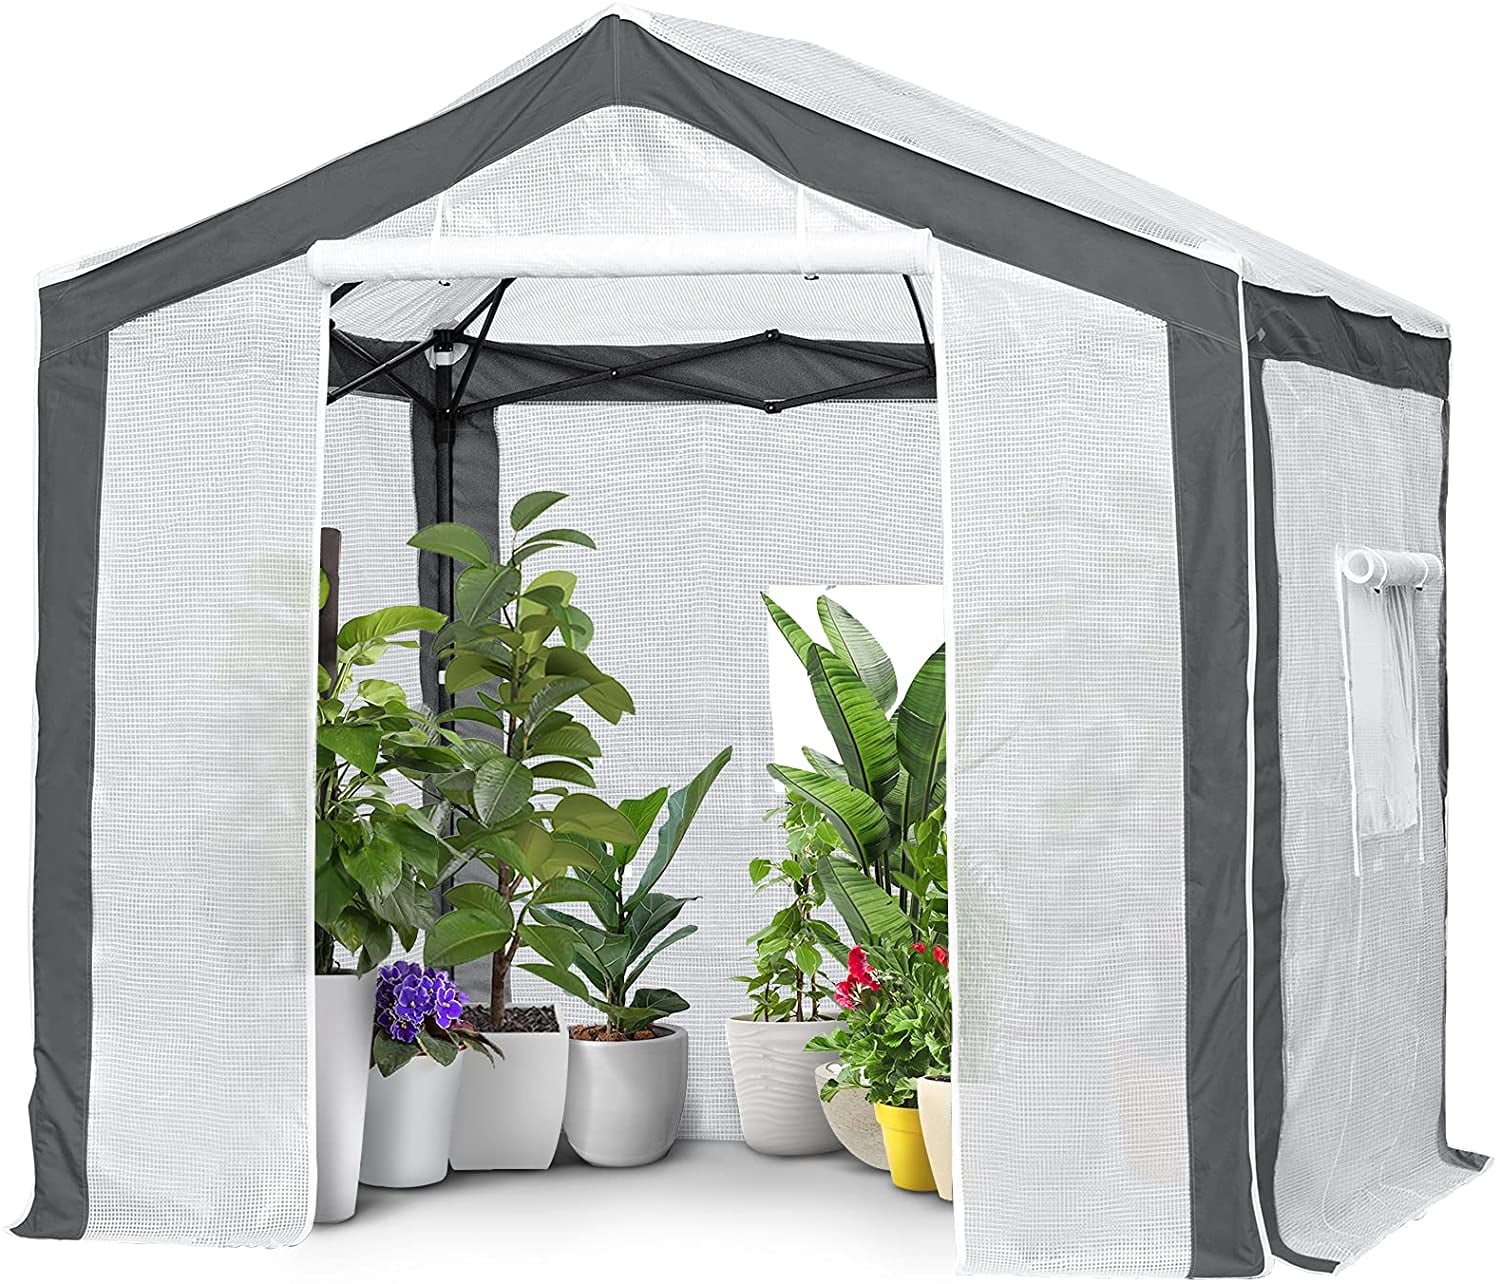 ASTEROUTDOOR 8'x 6' Portable Walk-in Instant Pop up Greenhouse for Outdoor Plant Garden Greenhouse,Front and Rear Roll-up Zipper Entry Doors and Roll-Up Side Windows and 2 Shelves 